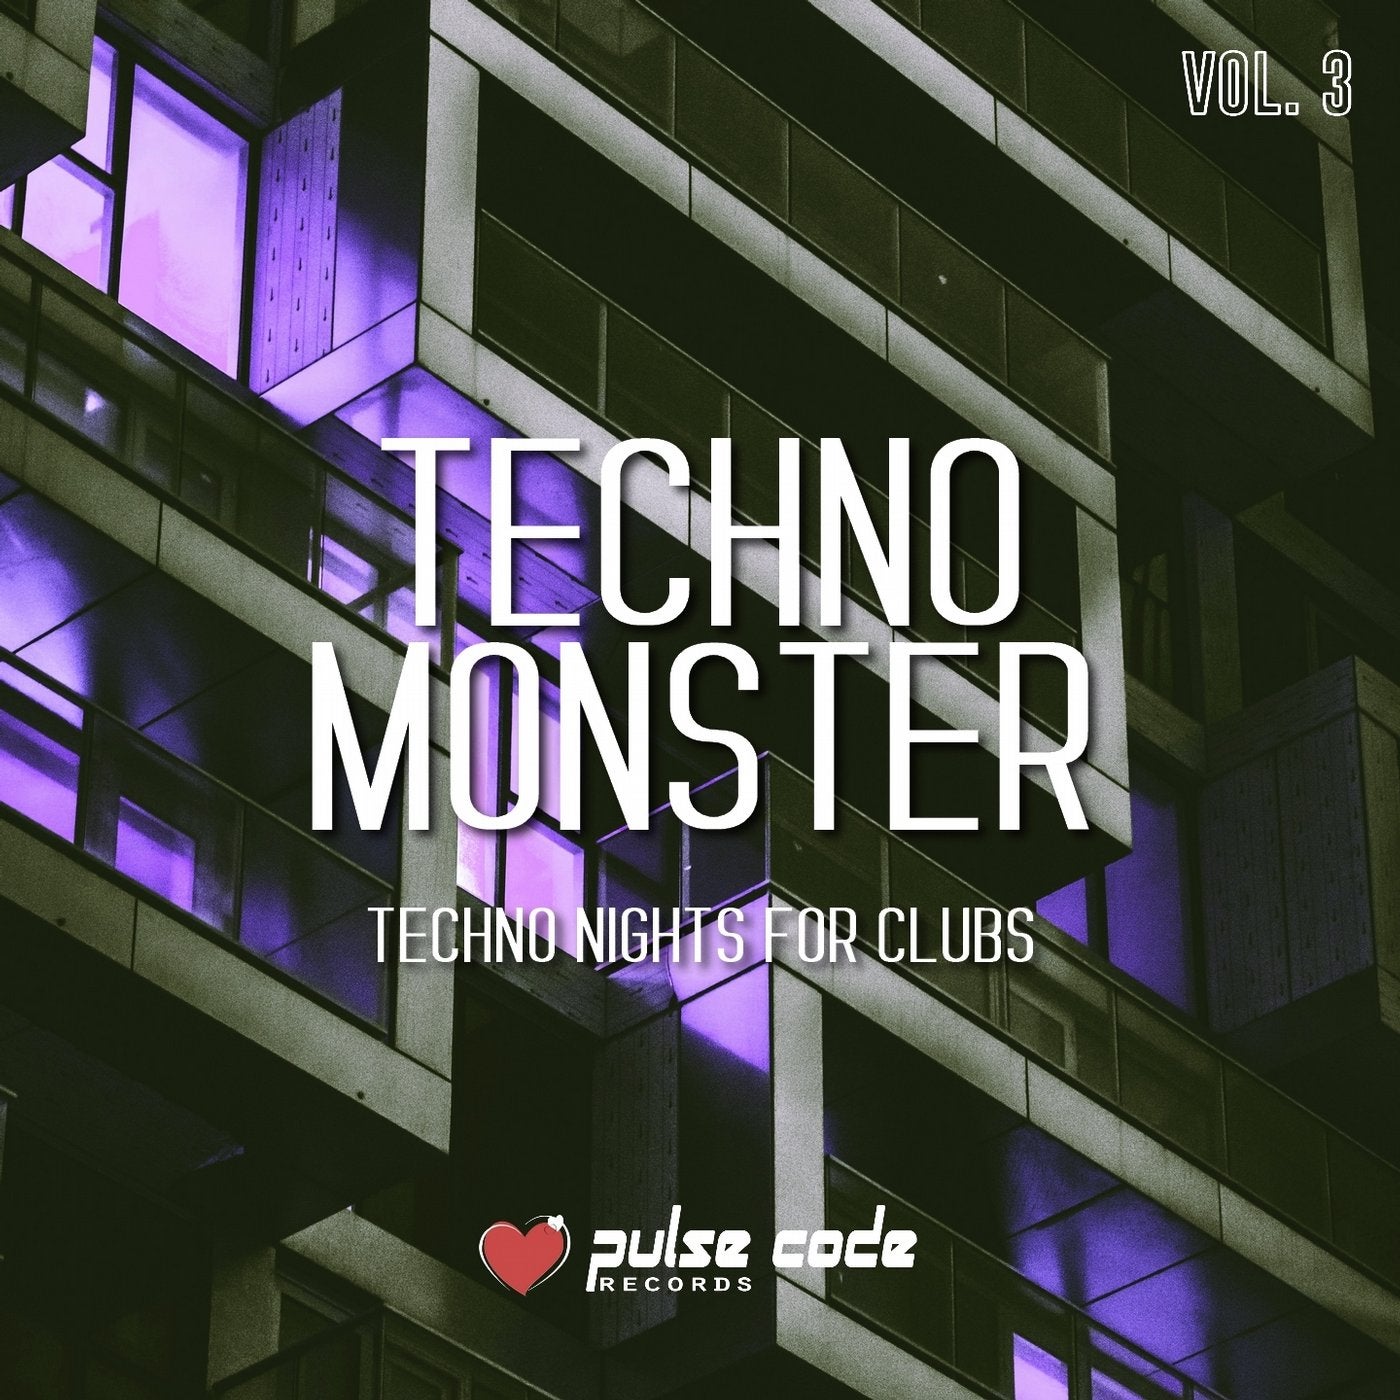 Techno Monster, Vol. 3 (Techno Nights for Clubs)